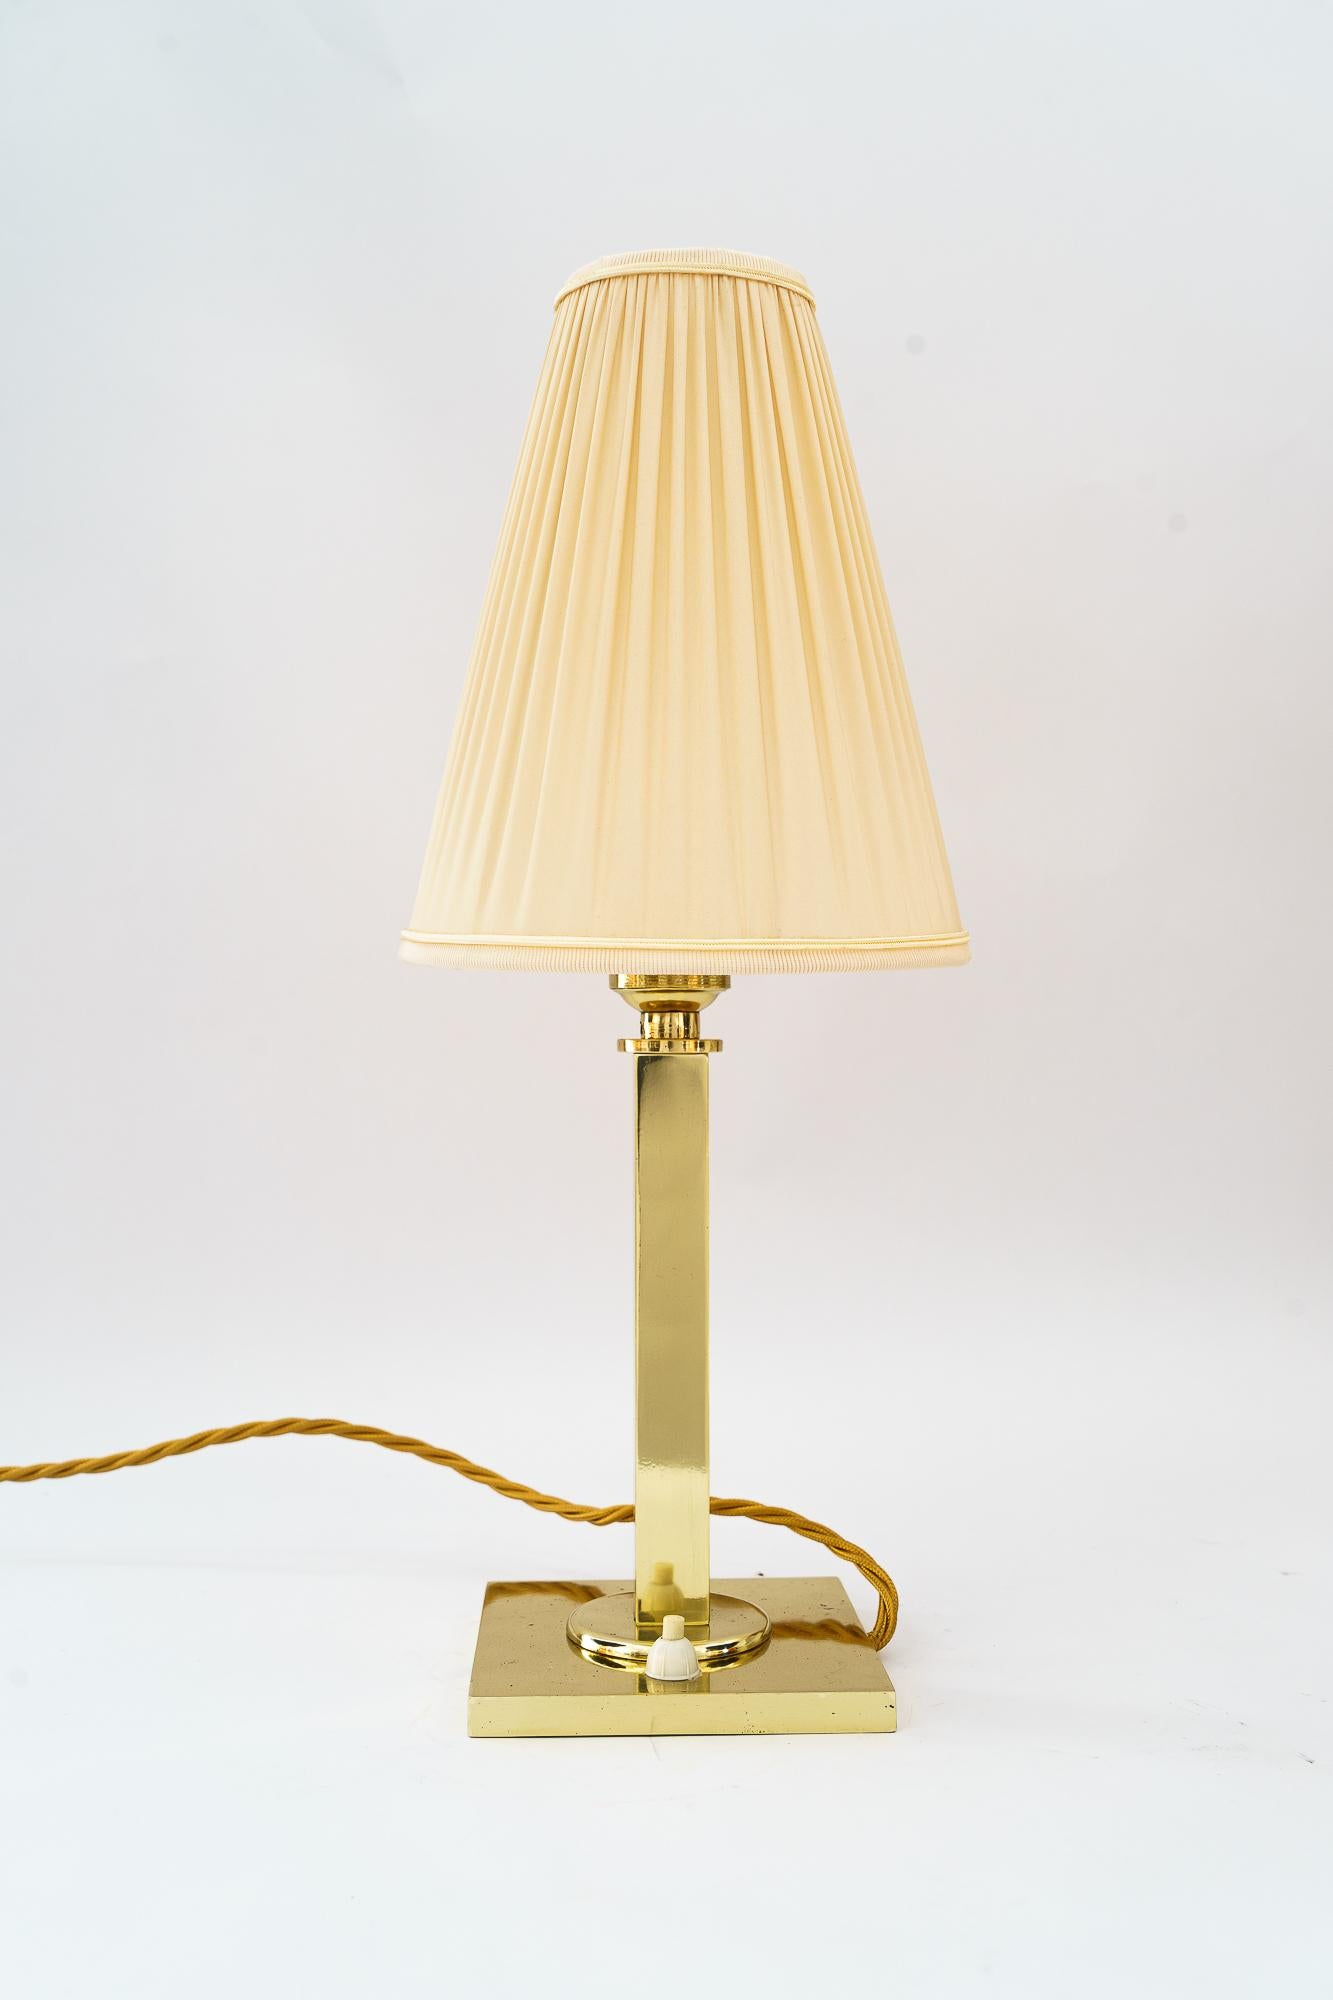 Masive Art Deco Table Lamp with fabric shade vienna around 1920s
Polished and stove enameled
The fabric shade is replaced ( new )